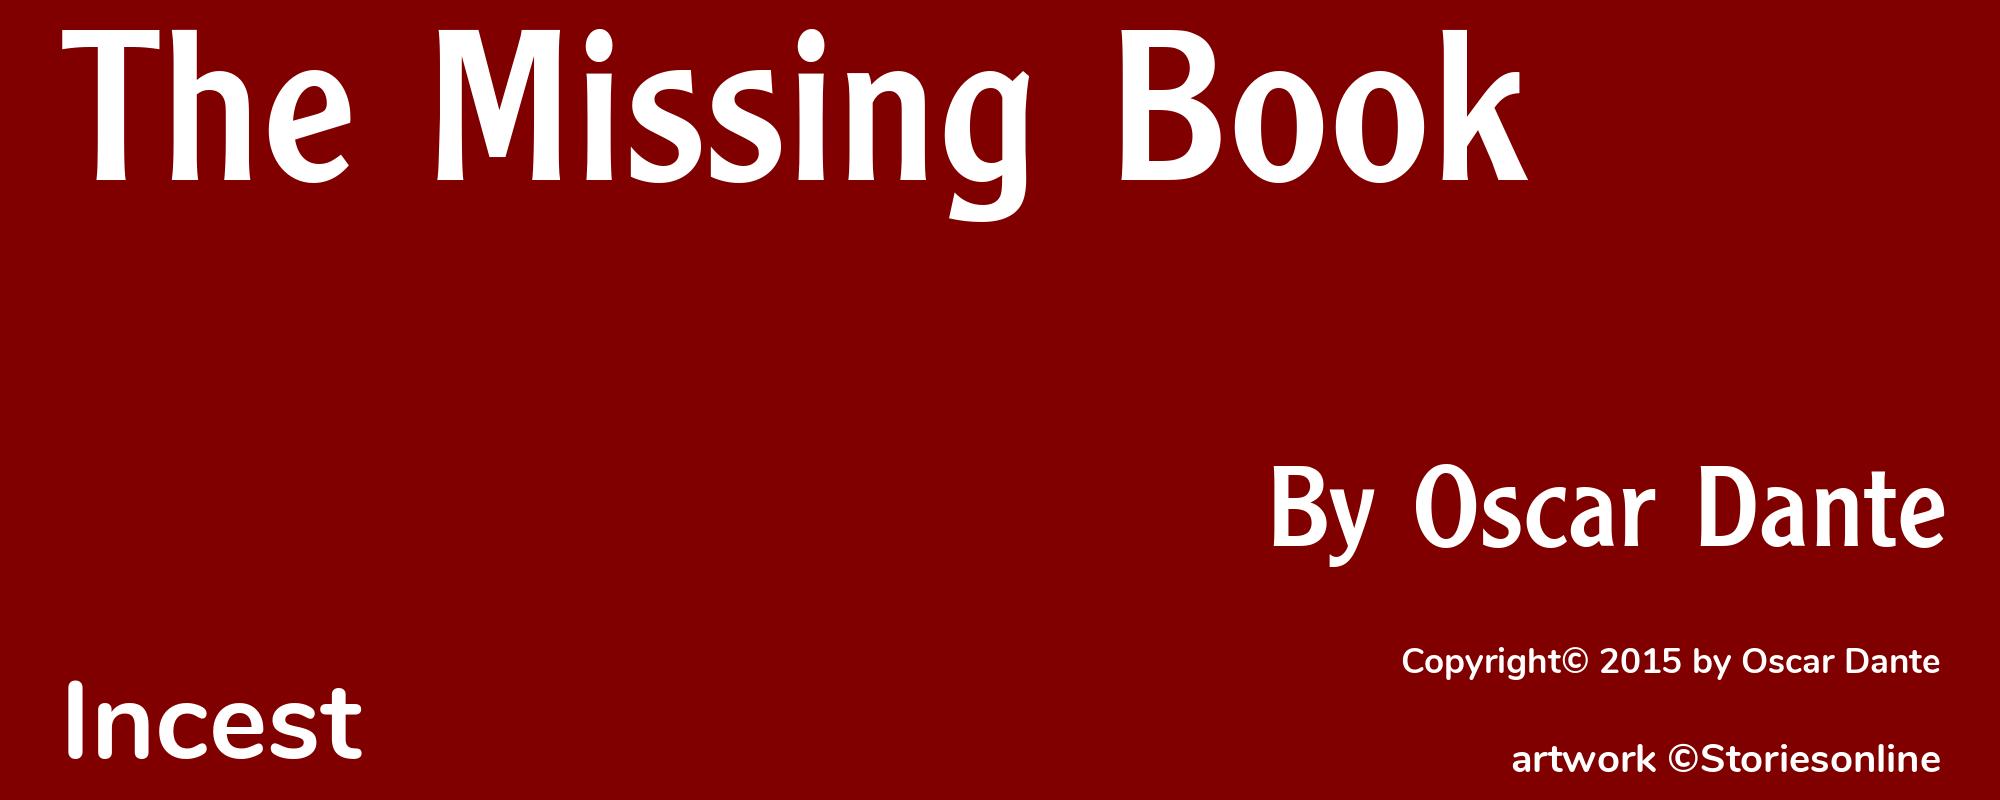 The Missing Book - Cover